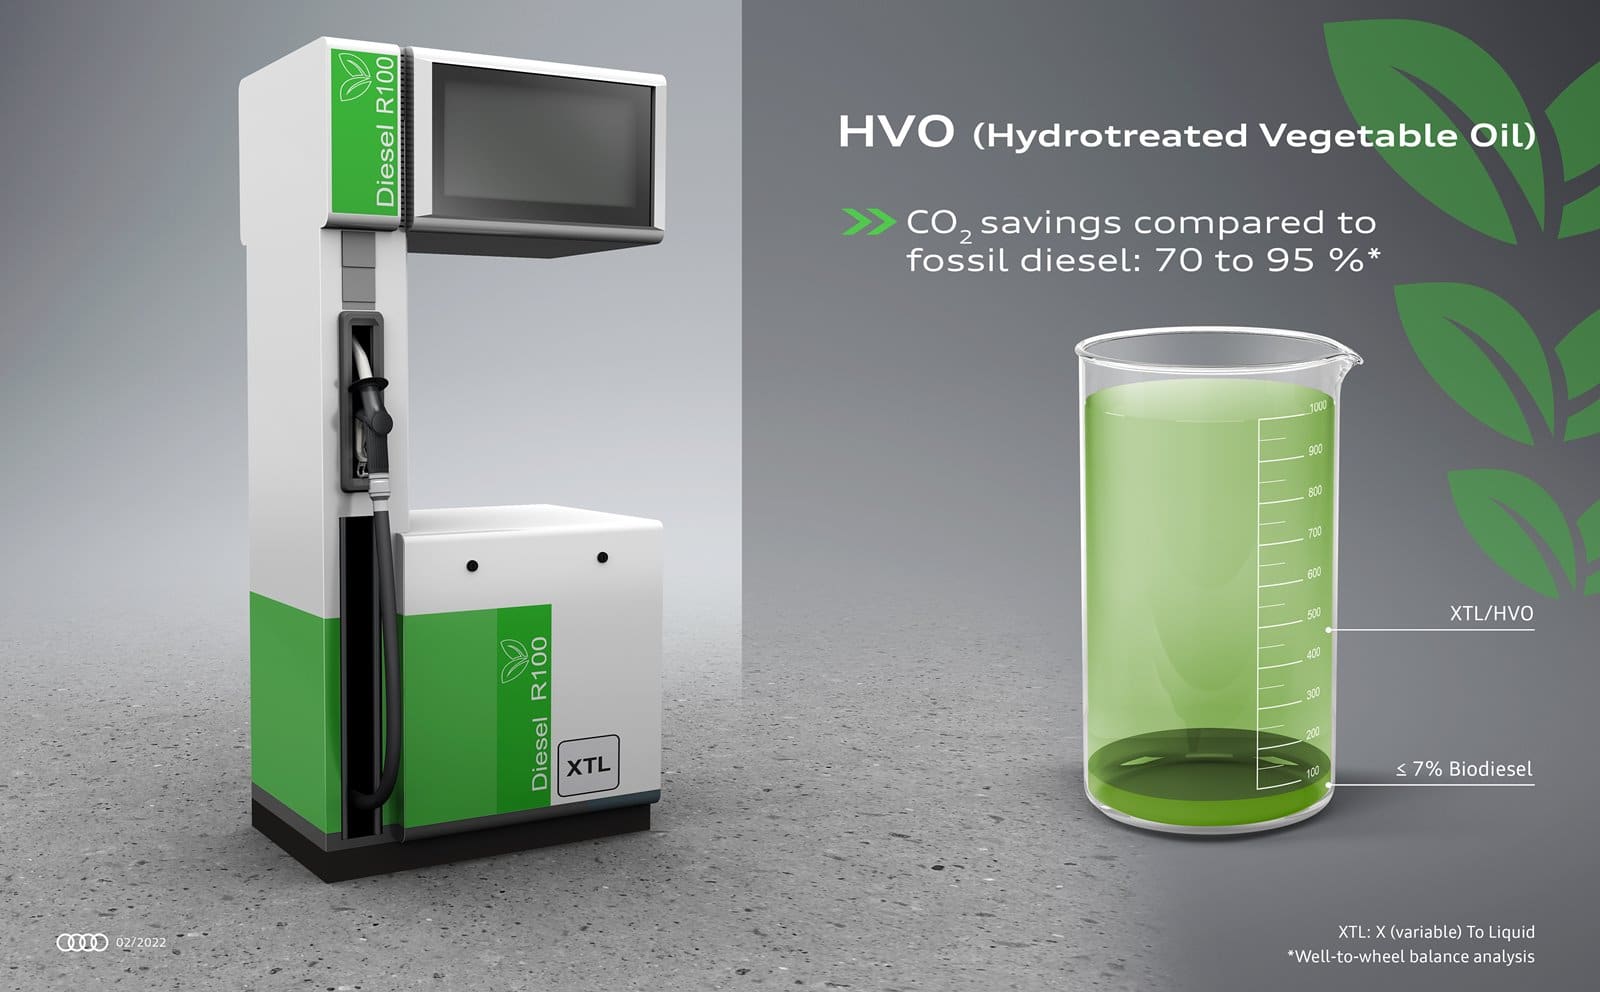 Renewable fuels or HVO reFuels, the future of diesel?